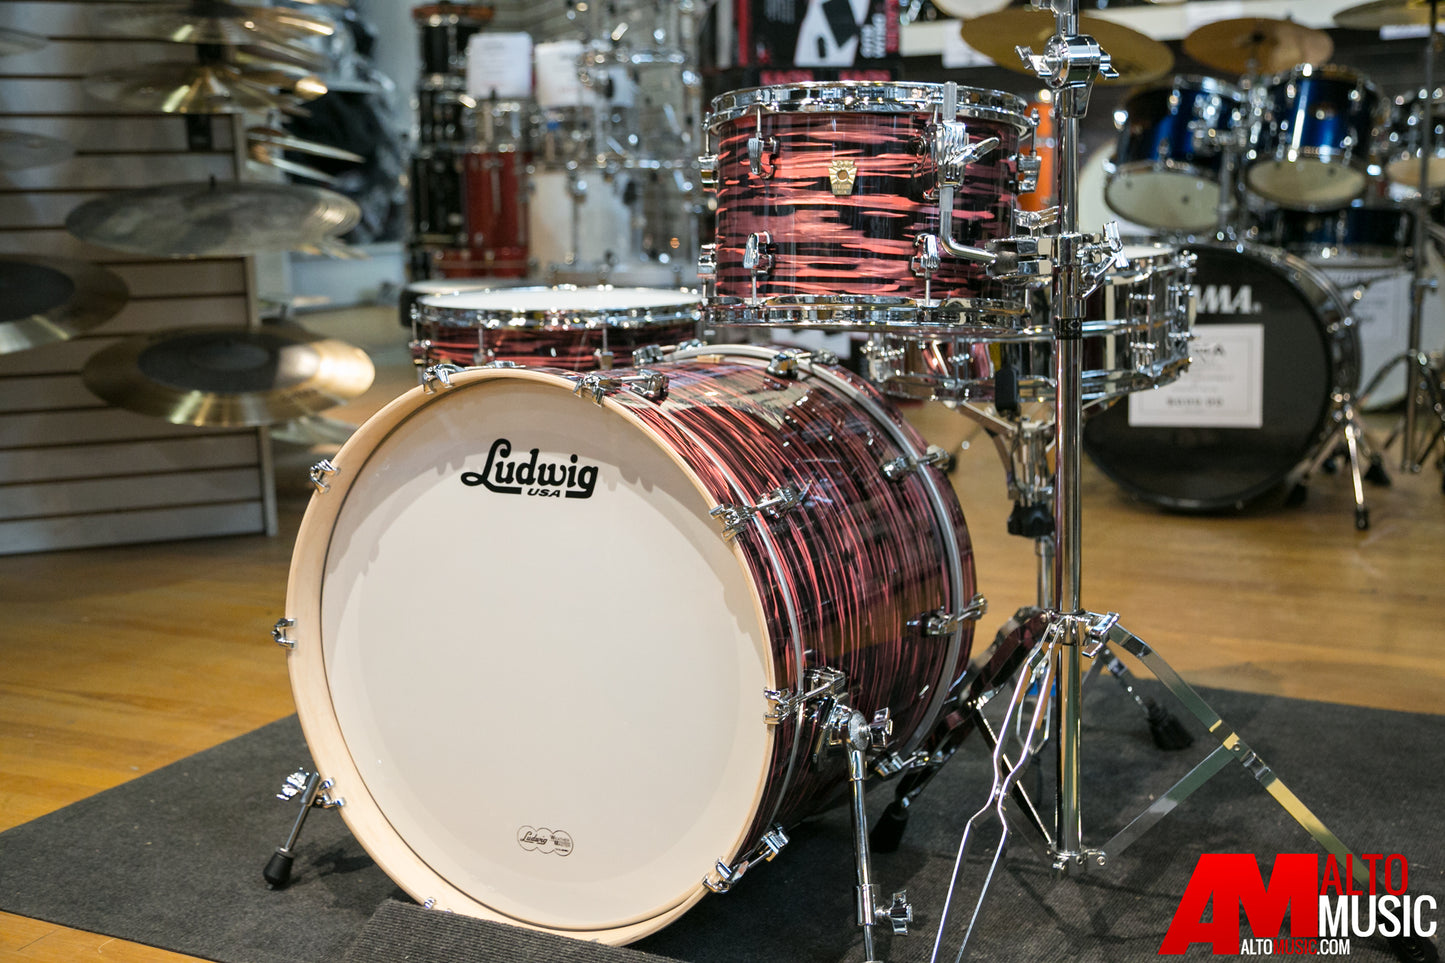 Ludwig Keystone Series Shell Kit In Salmon Oyster w/ FREE SNARE DRUM! LK7323KXSO